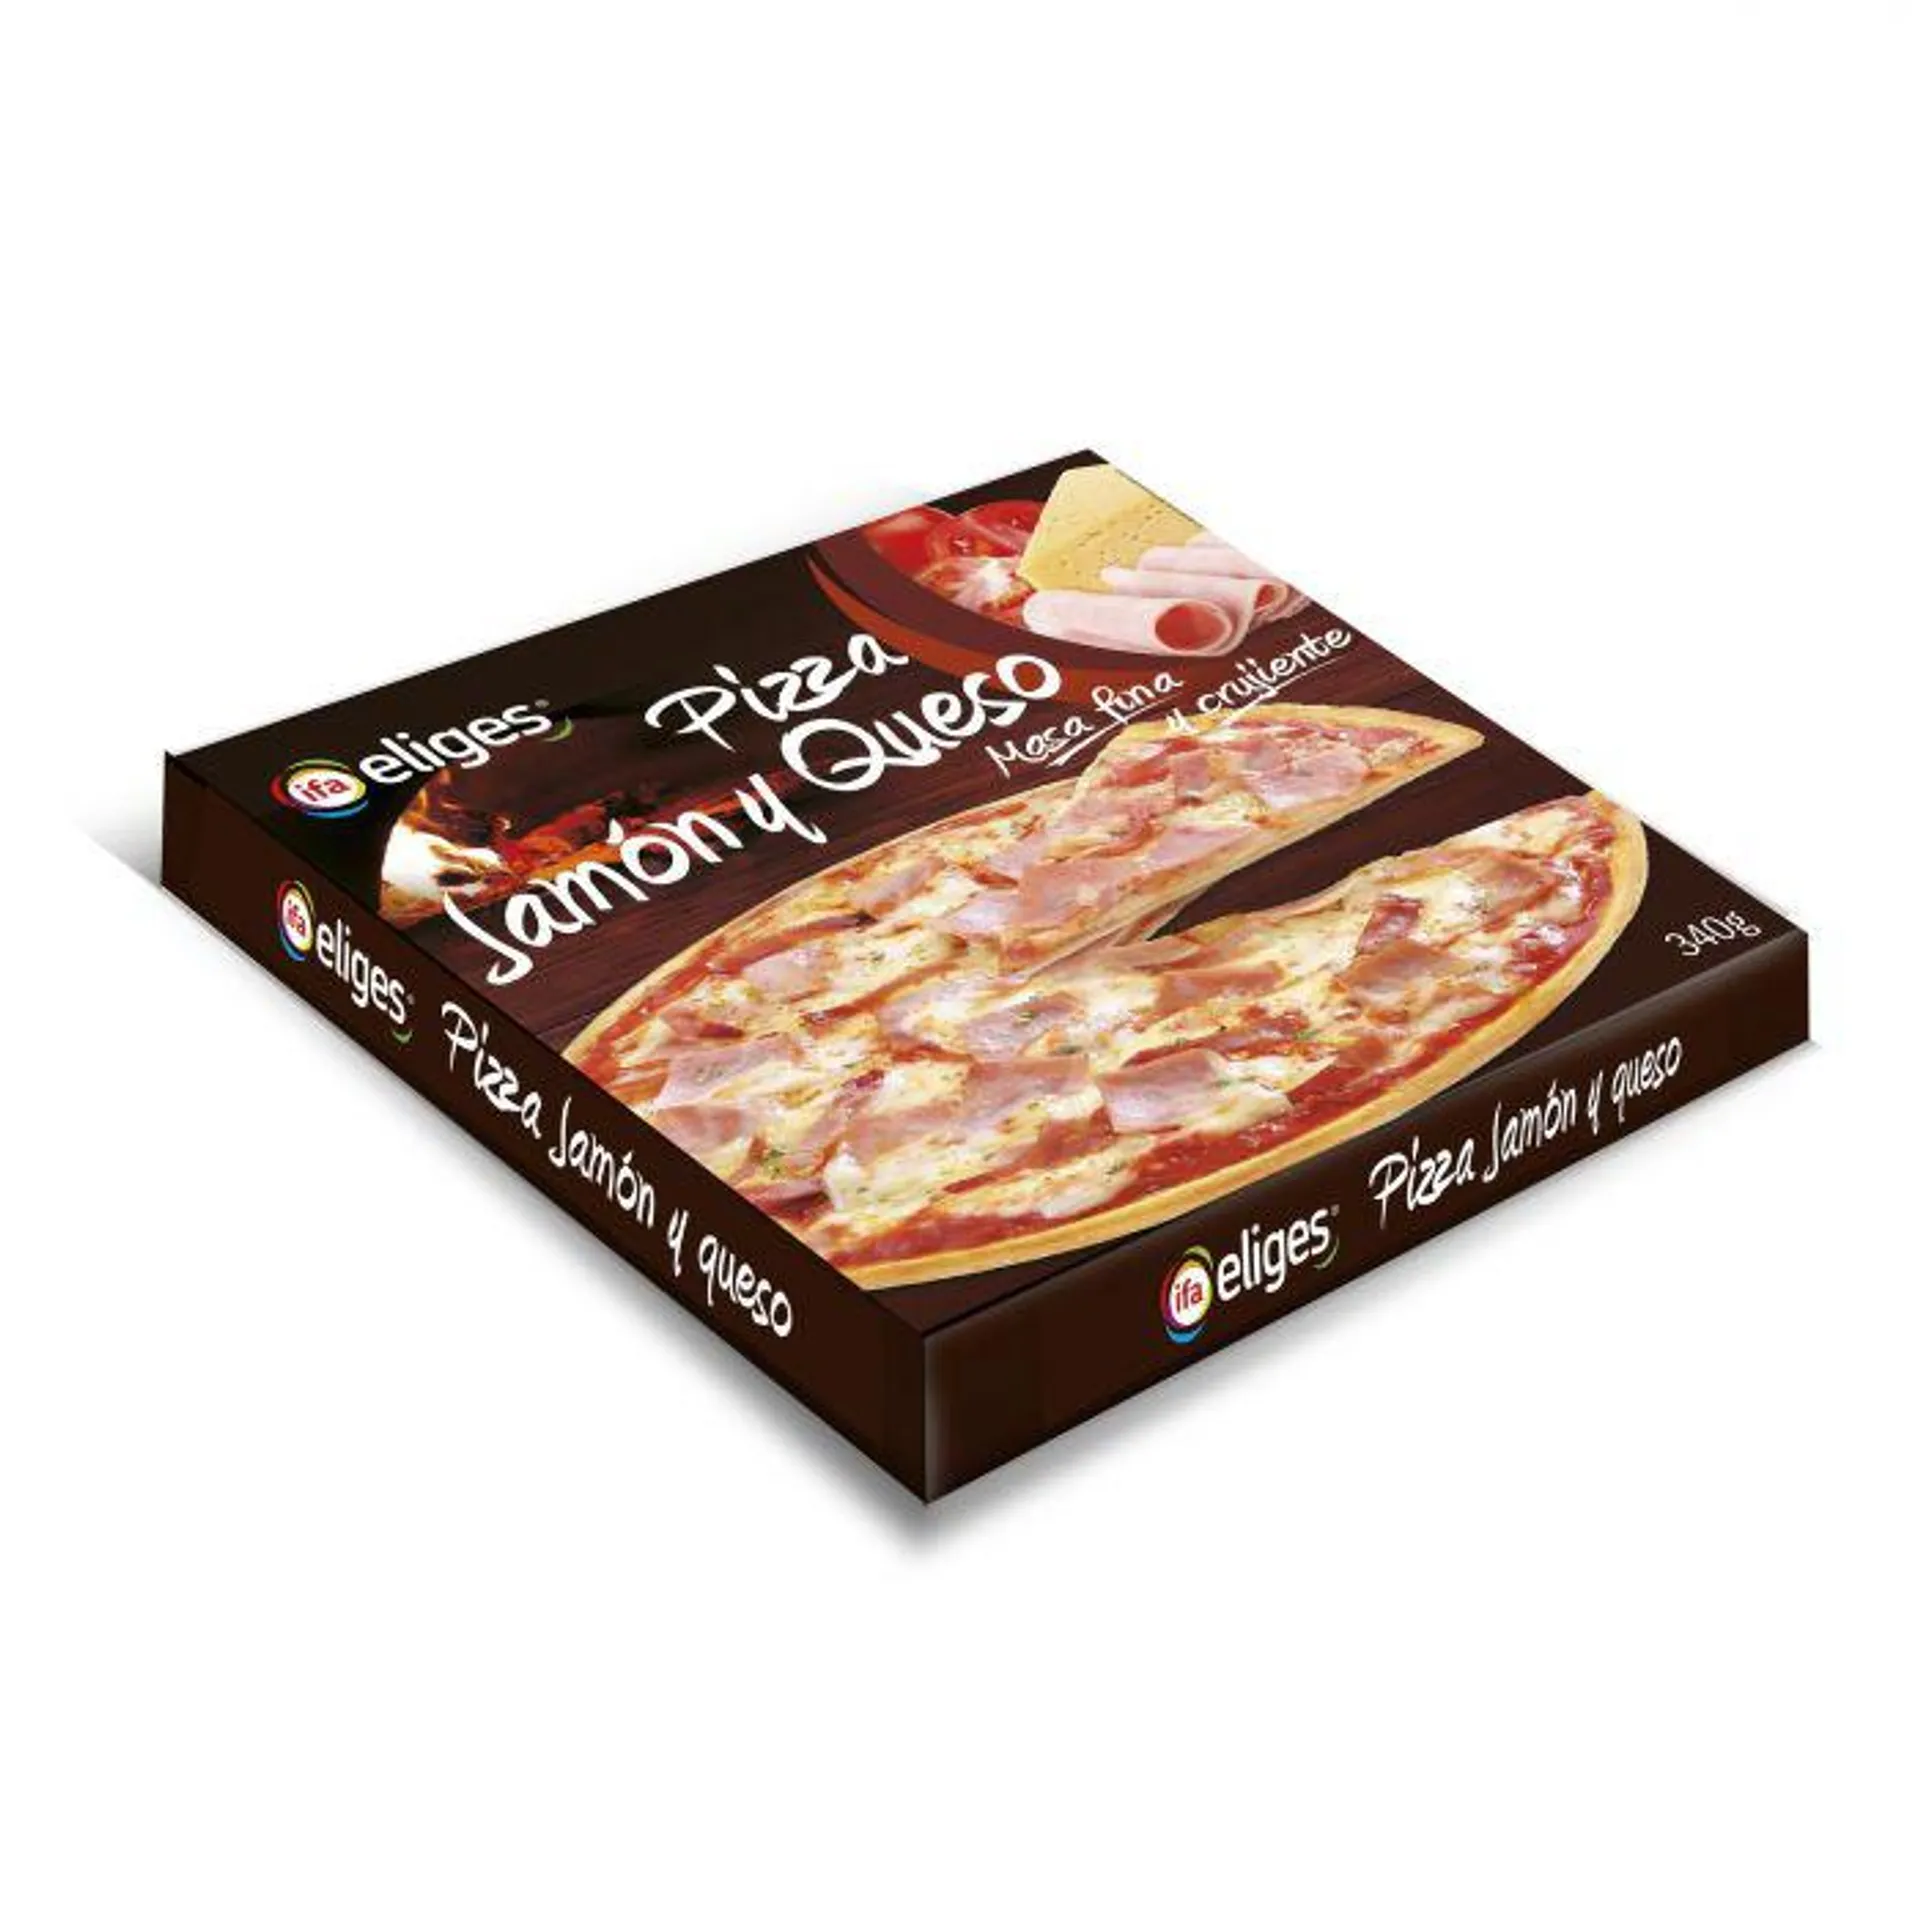 Pizza jamon y queso ifa eliges 340g